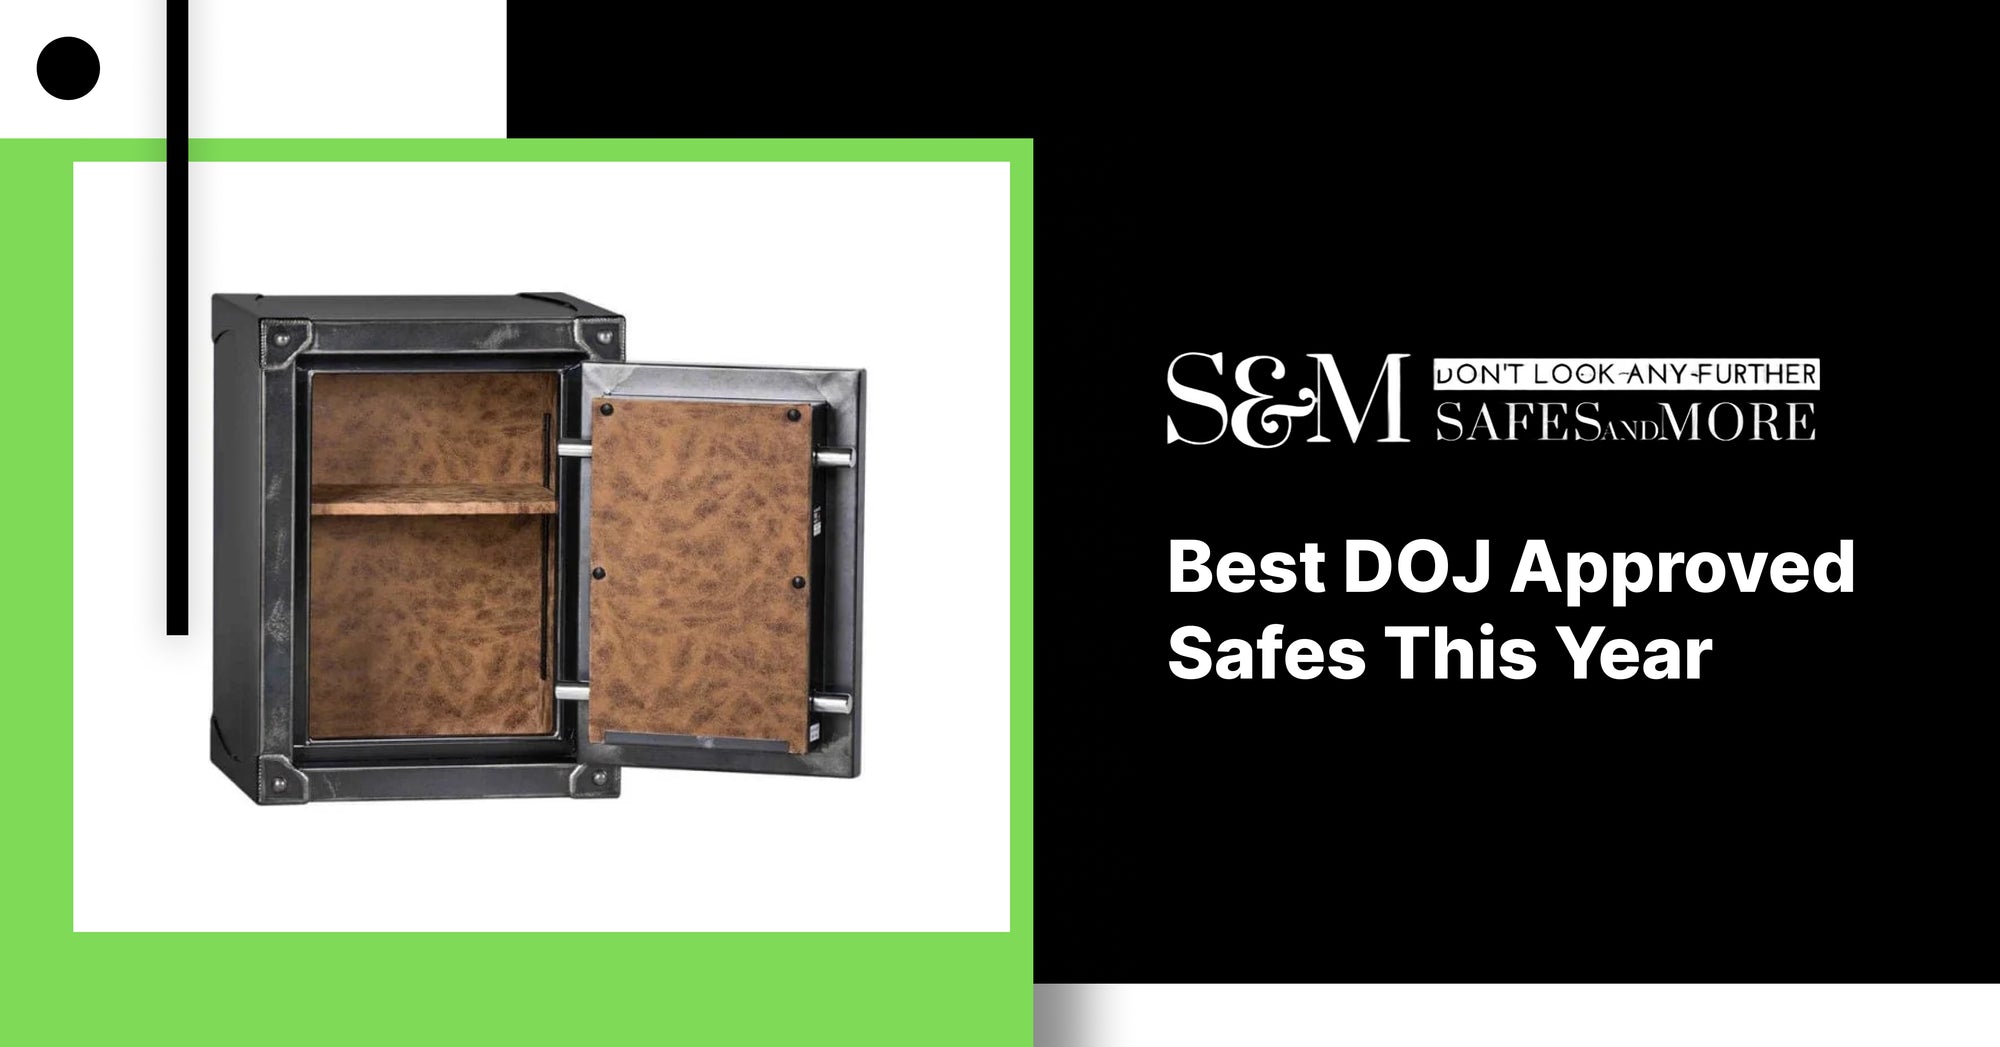 Best DOJ Approved Safes This Year